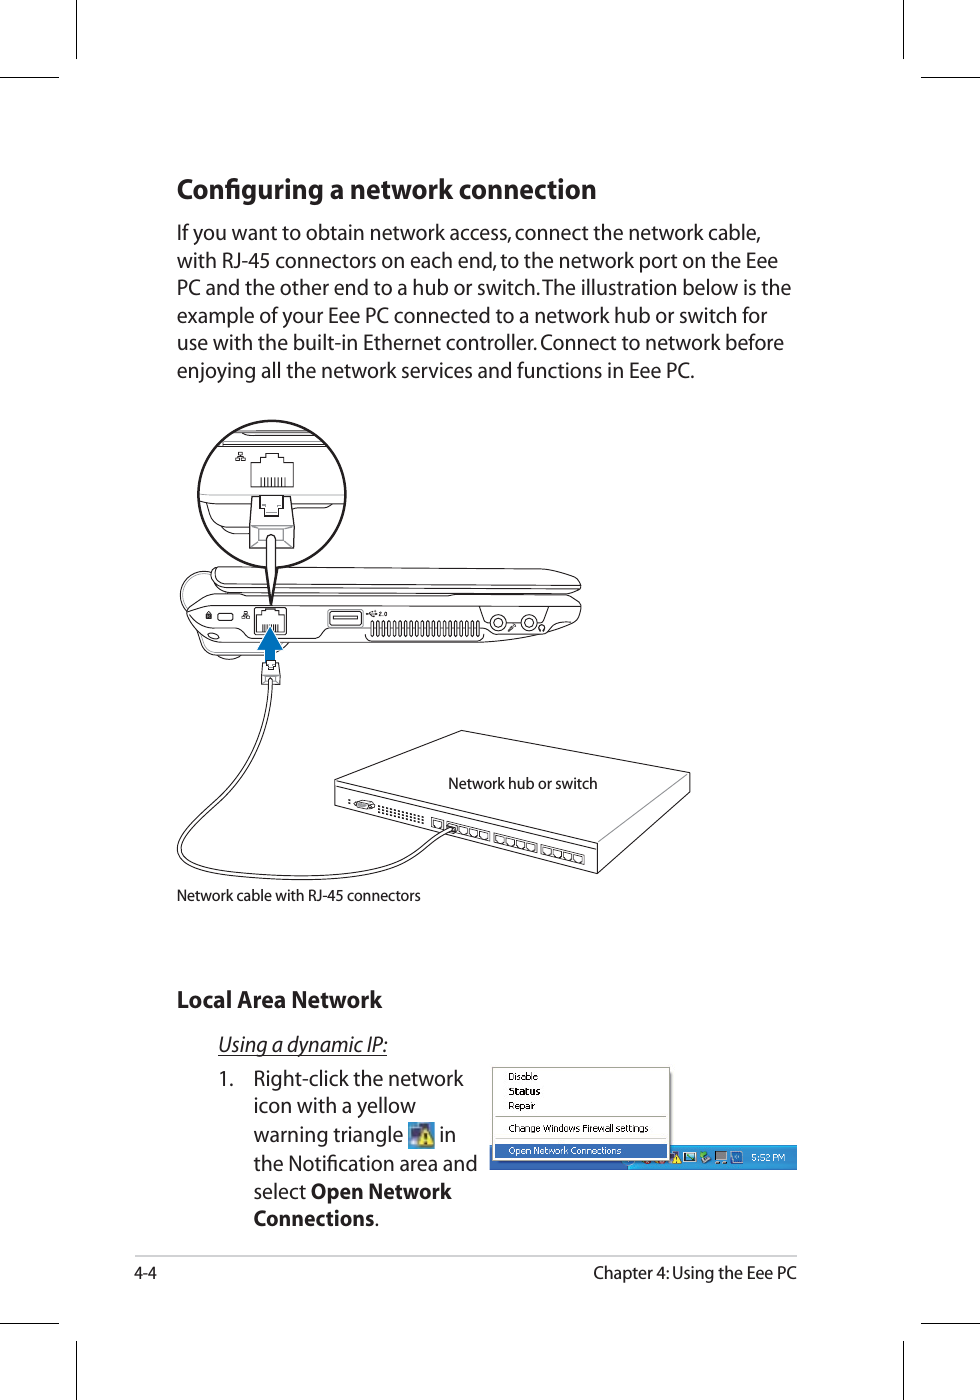 4-4Chapter 4: Using the Eee PCConﬁguring a network connectionIf you want to obtain network access, connect the network cable, with RJ-45 connectors on each end, to the network port on the Eee PC and the other end to a hub or switch. The illustration below is the example of your Eee PC connected to a network hub or switch for use with the built-in Ethernet controller. Connect to network before enjoying all the network services and functions in Eee PC.Using a dynamic IP:1. Right-click the network icon with a yellow warning triangle  inthe Notiﬁcation area and select Open Network Connections.Local Area NetworkNetwork hub or switchNetwork cable with RJ-45 connectors